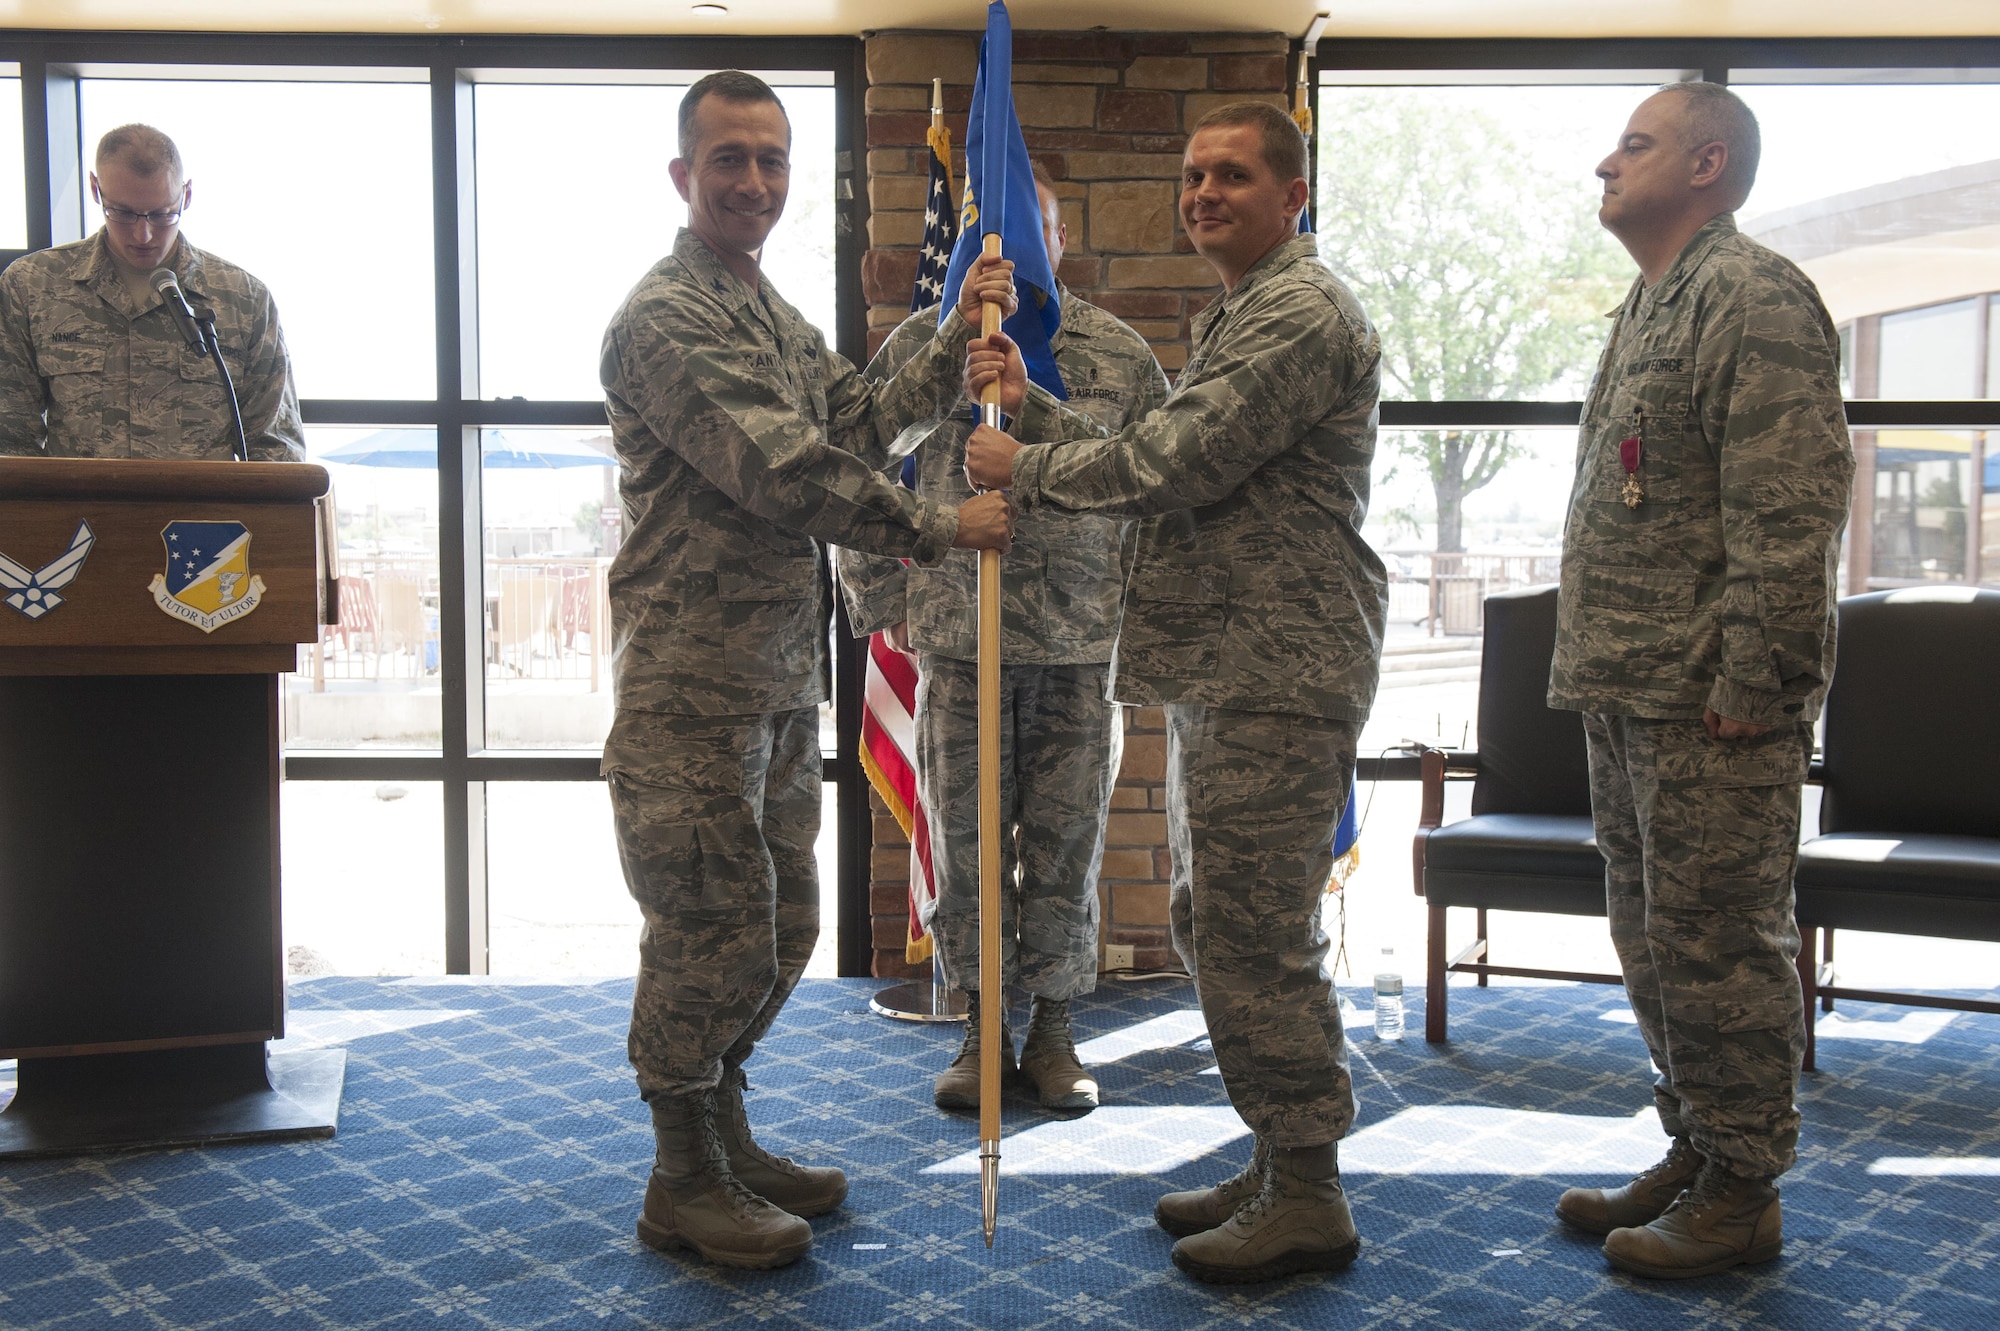 Col. Houston R. Cantwell, 49th Wing commander, gives the 49th Medical Group guidon to Col. Paul R. Brezinski during a change of command ceremony at Club Holloman, June 23, 2017. During the ceremony, Col. Paul R. Brezinski took command of the 49th MDG from Col. Paul A. Willingham, 49th MDG outgoing commander. (U.S. Air Force photo by Airman 1st Class Ilyana A. Escalona)